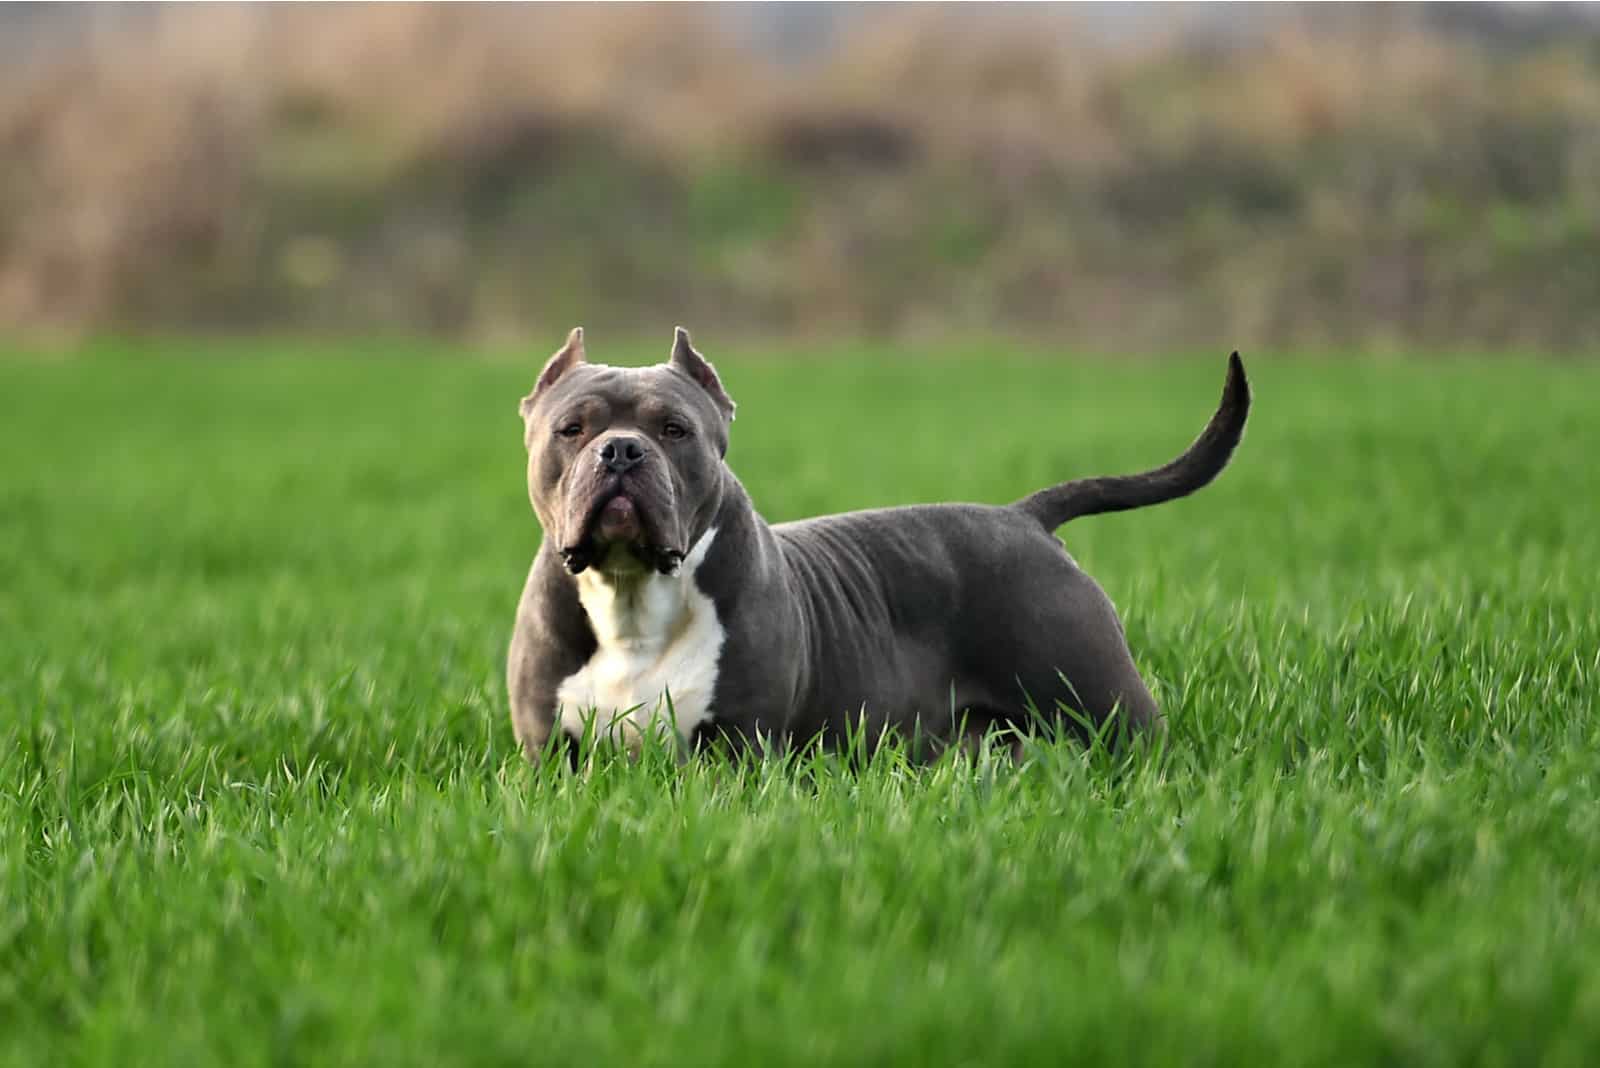 American Bully sitting on grass outside